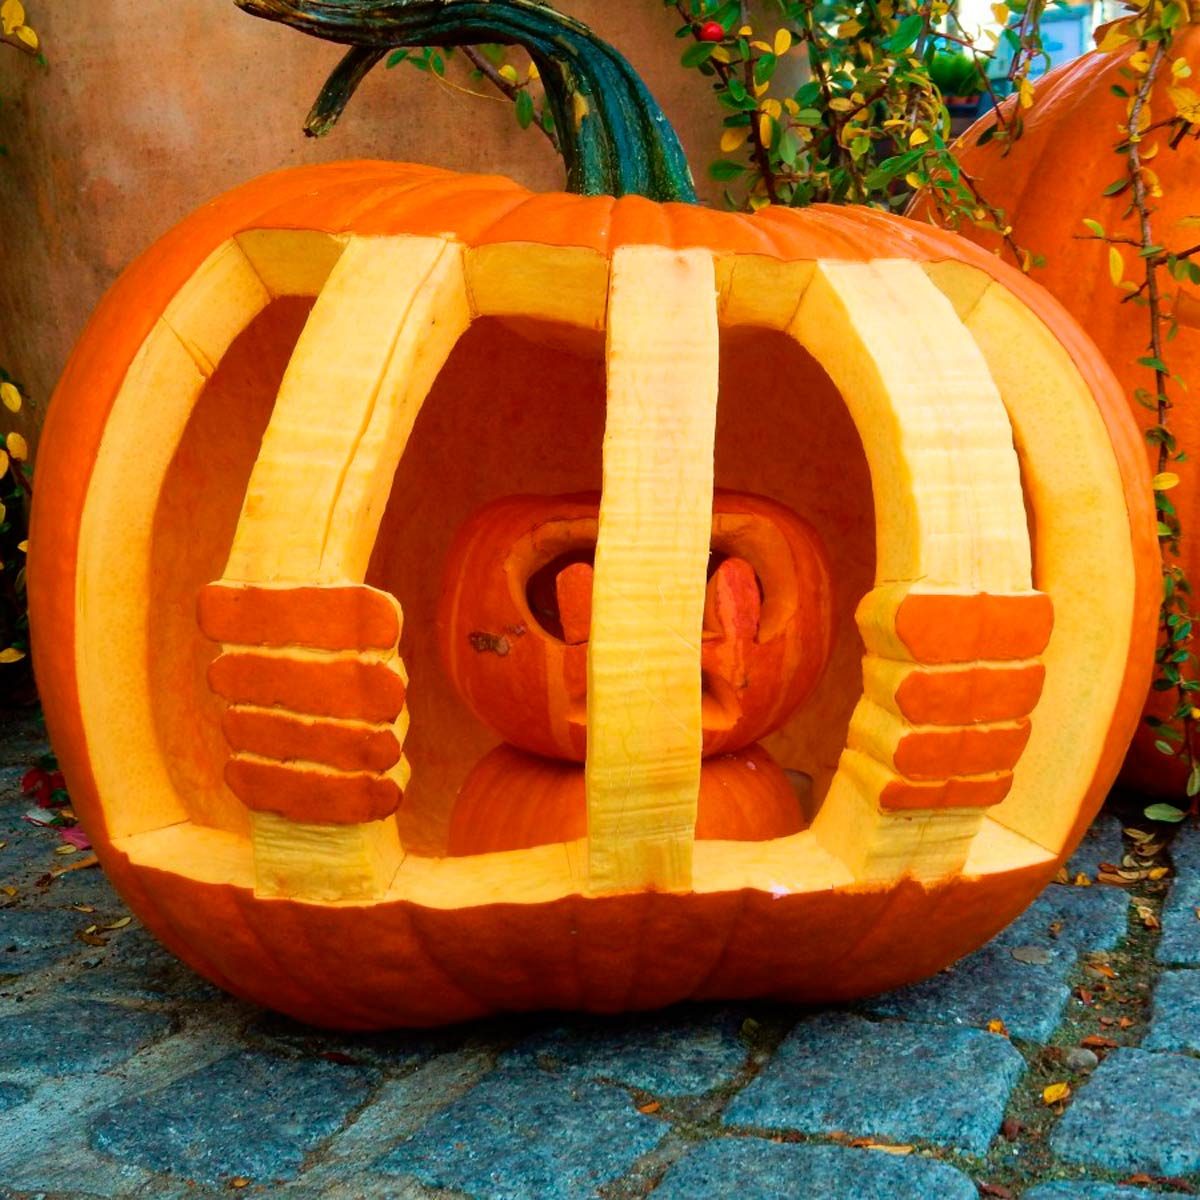 20 Pumpkin Carving Ideas To Inspire You This Halloween Readers Digest ...